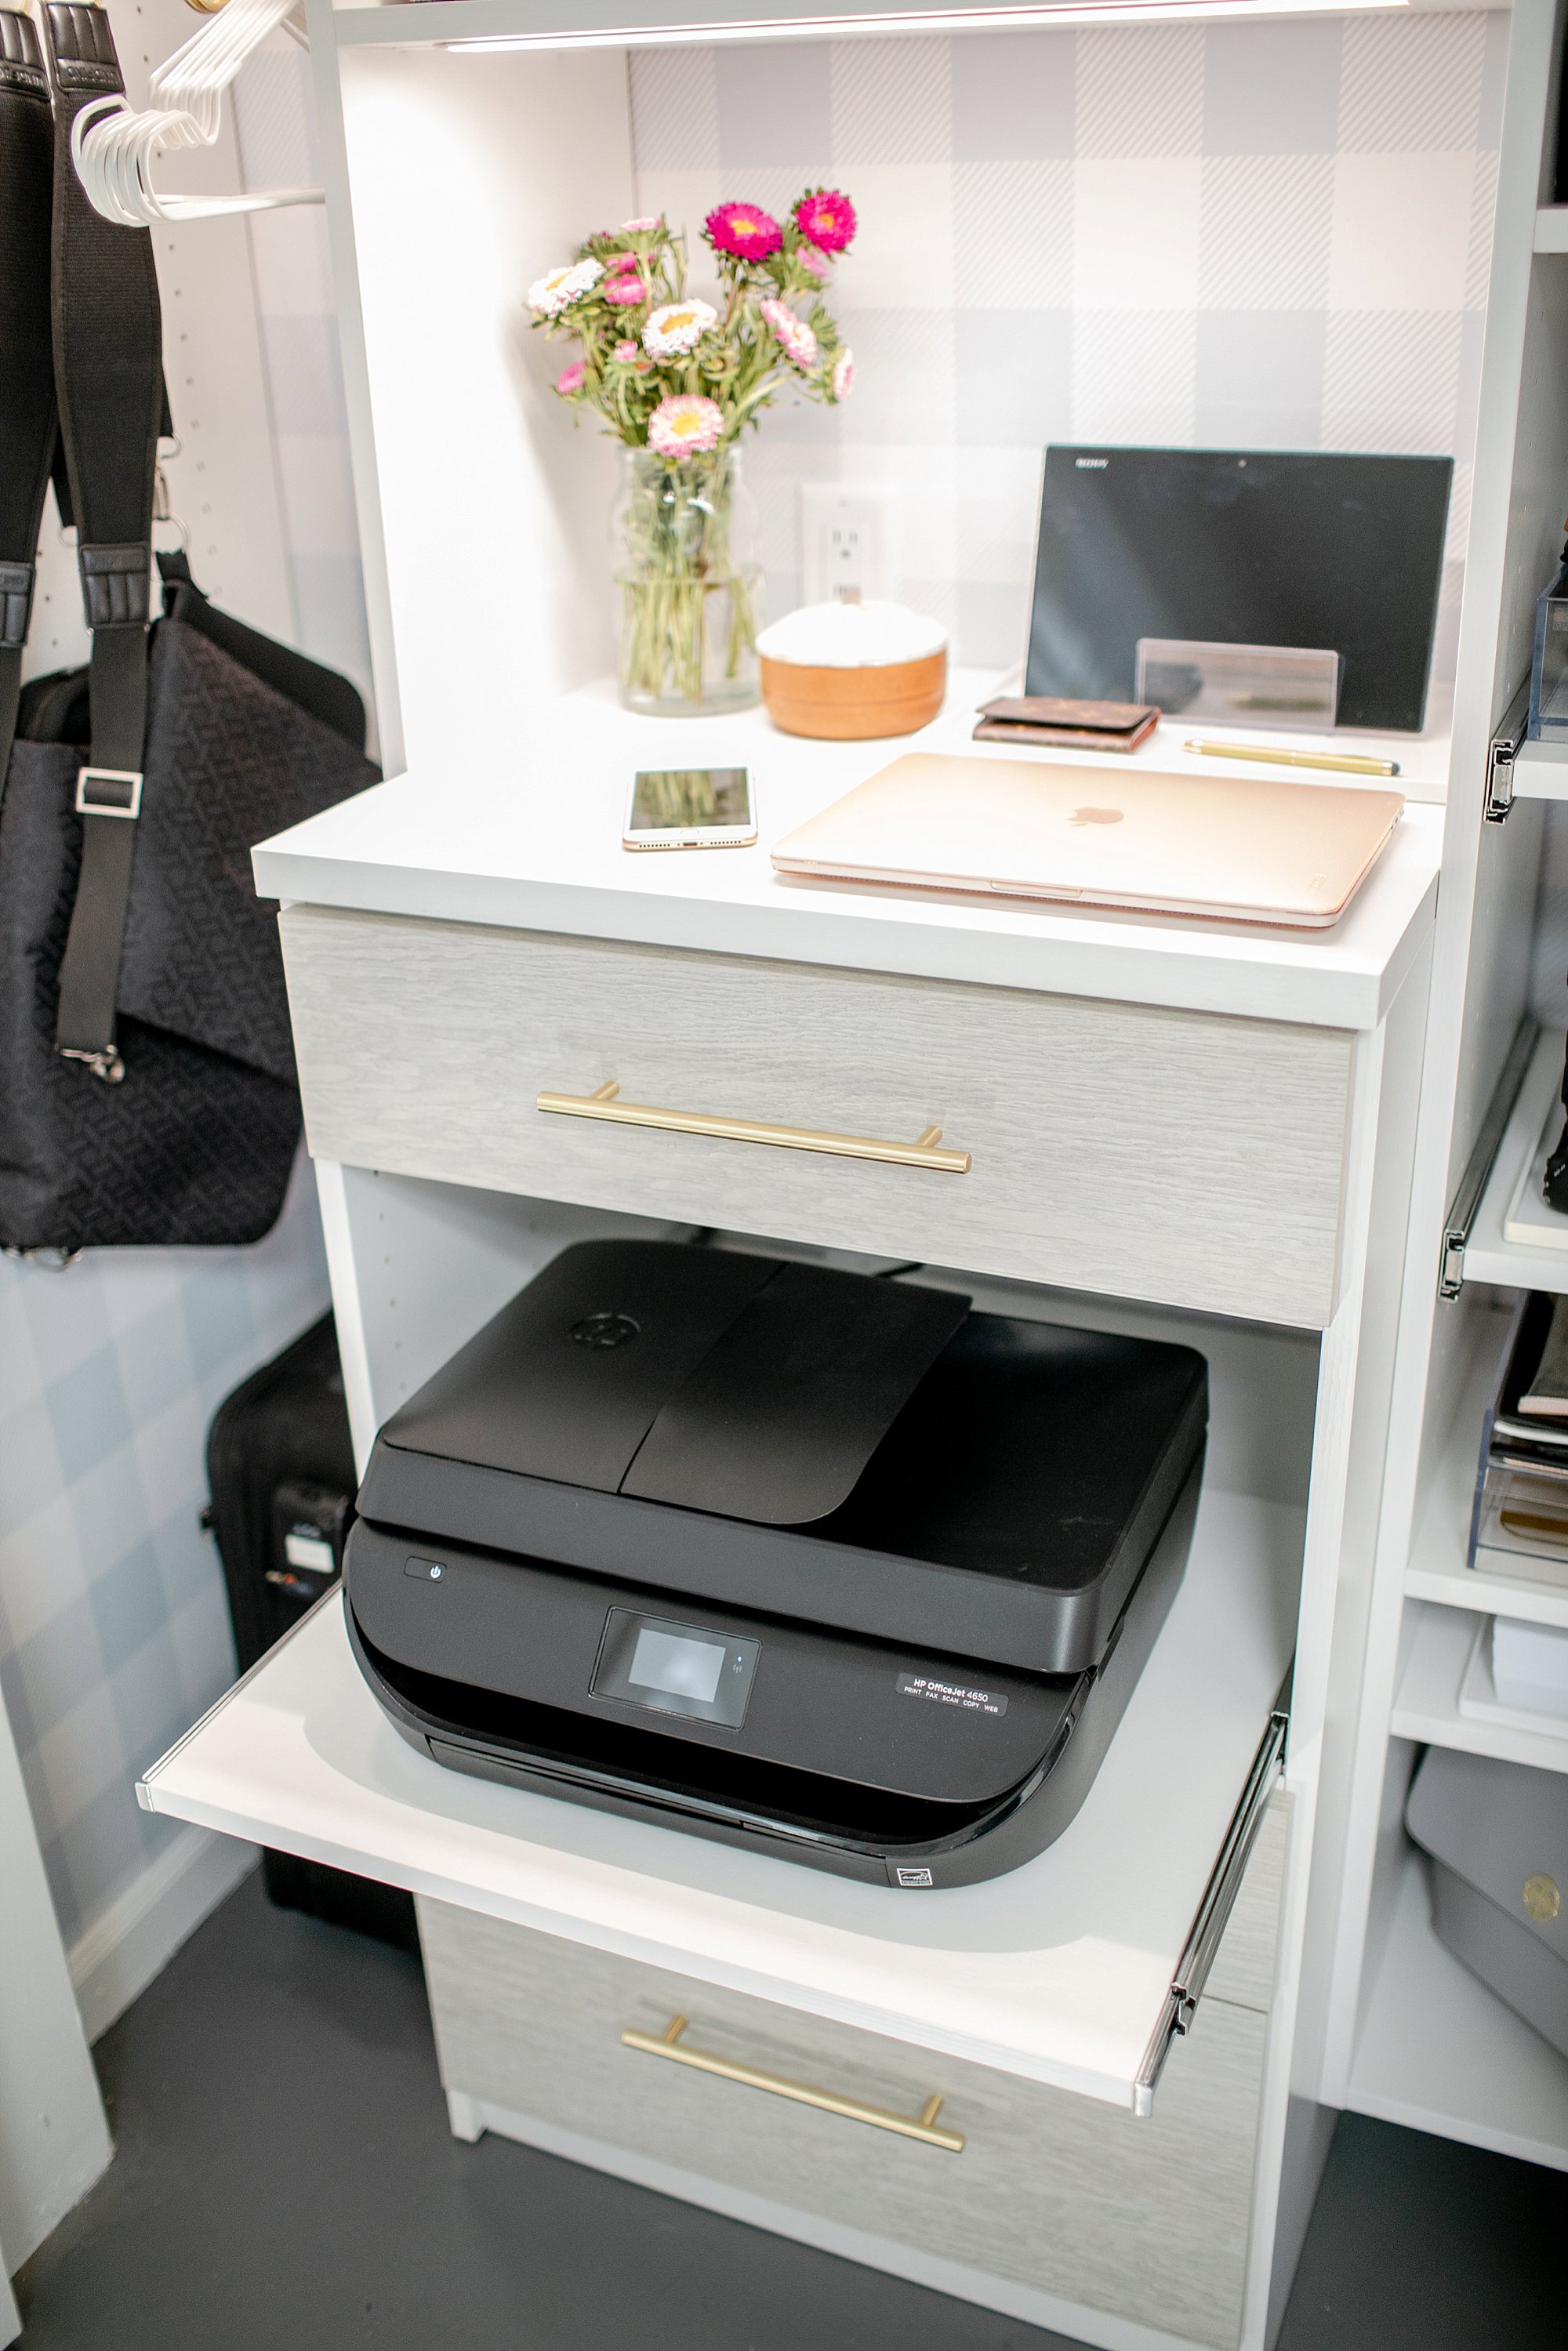 slide out printer in custom office closet: final reveal of office closet reveal belonging to photographer blogger Diana Elizabeth in phoenix arizona. created by California closets and with removable buffalo check wallpaper #office #closet #wallpaper #organization #lensorganization #lensdrawer